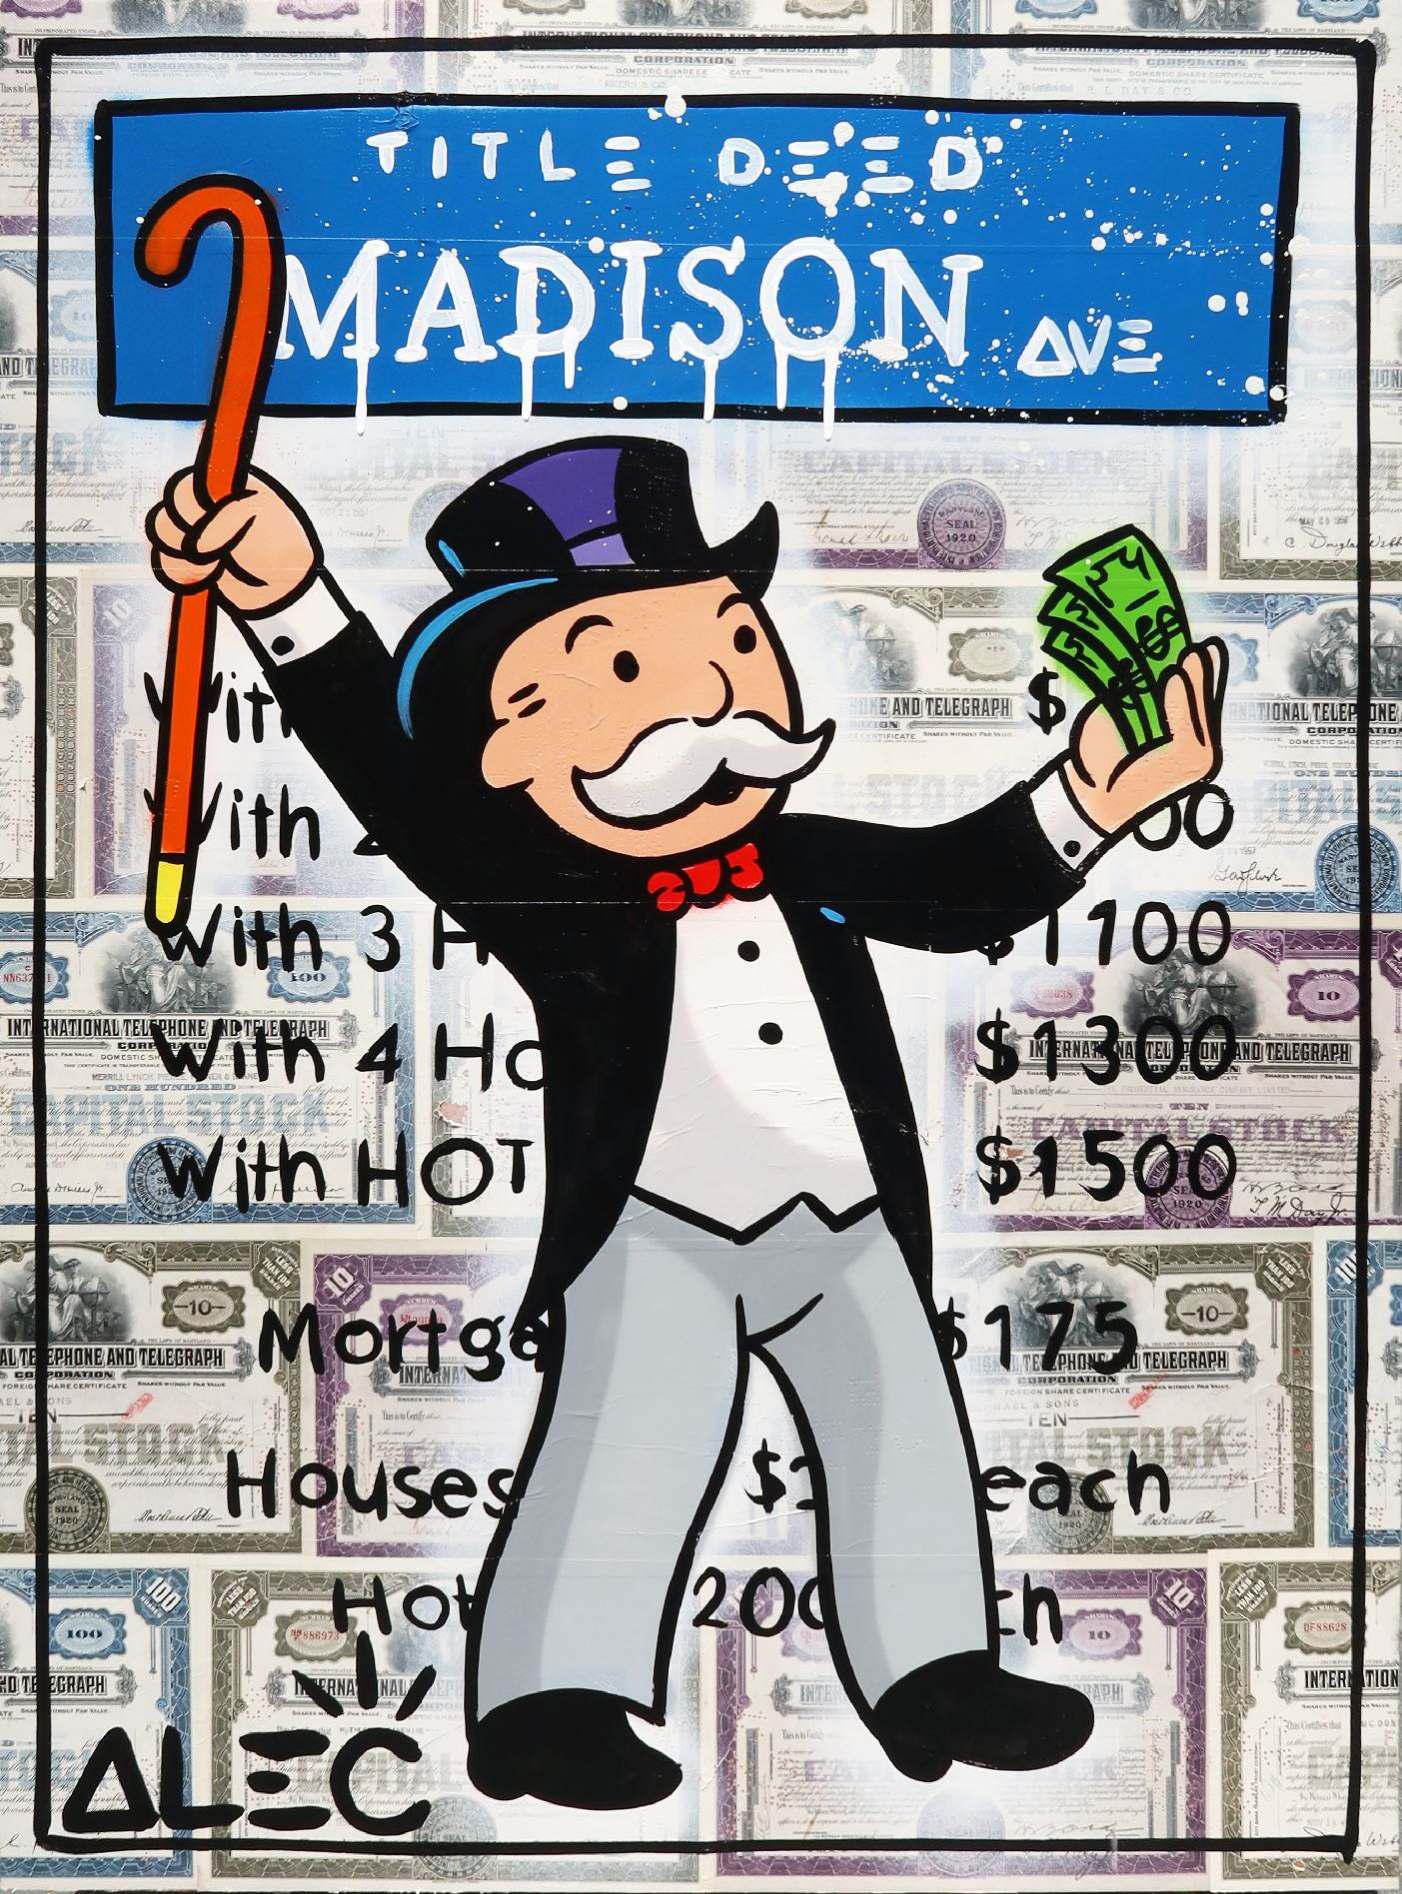 Monopoly Cane and Cash Madison Ave Title Deed - Alec Monopoly - Eden Gallery